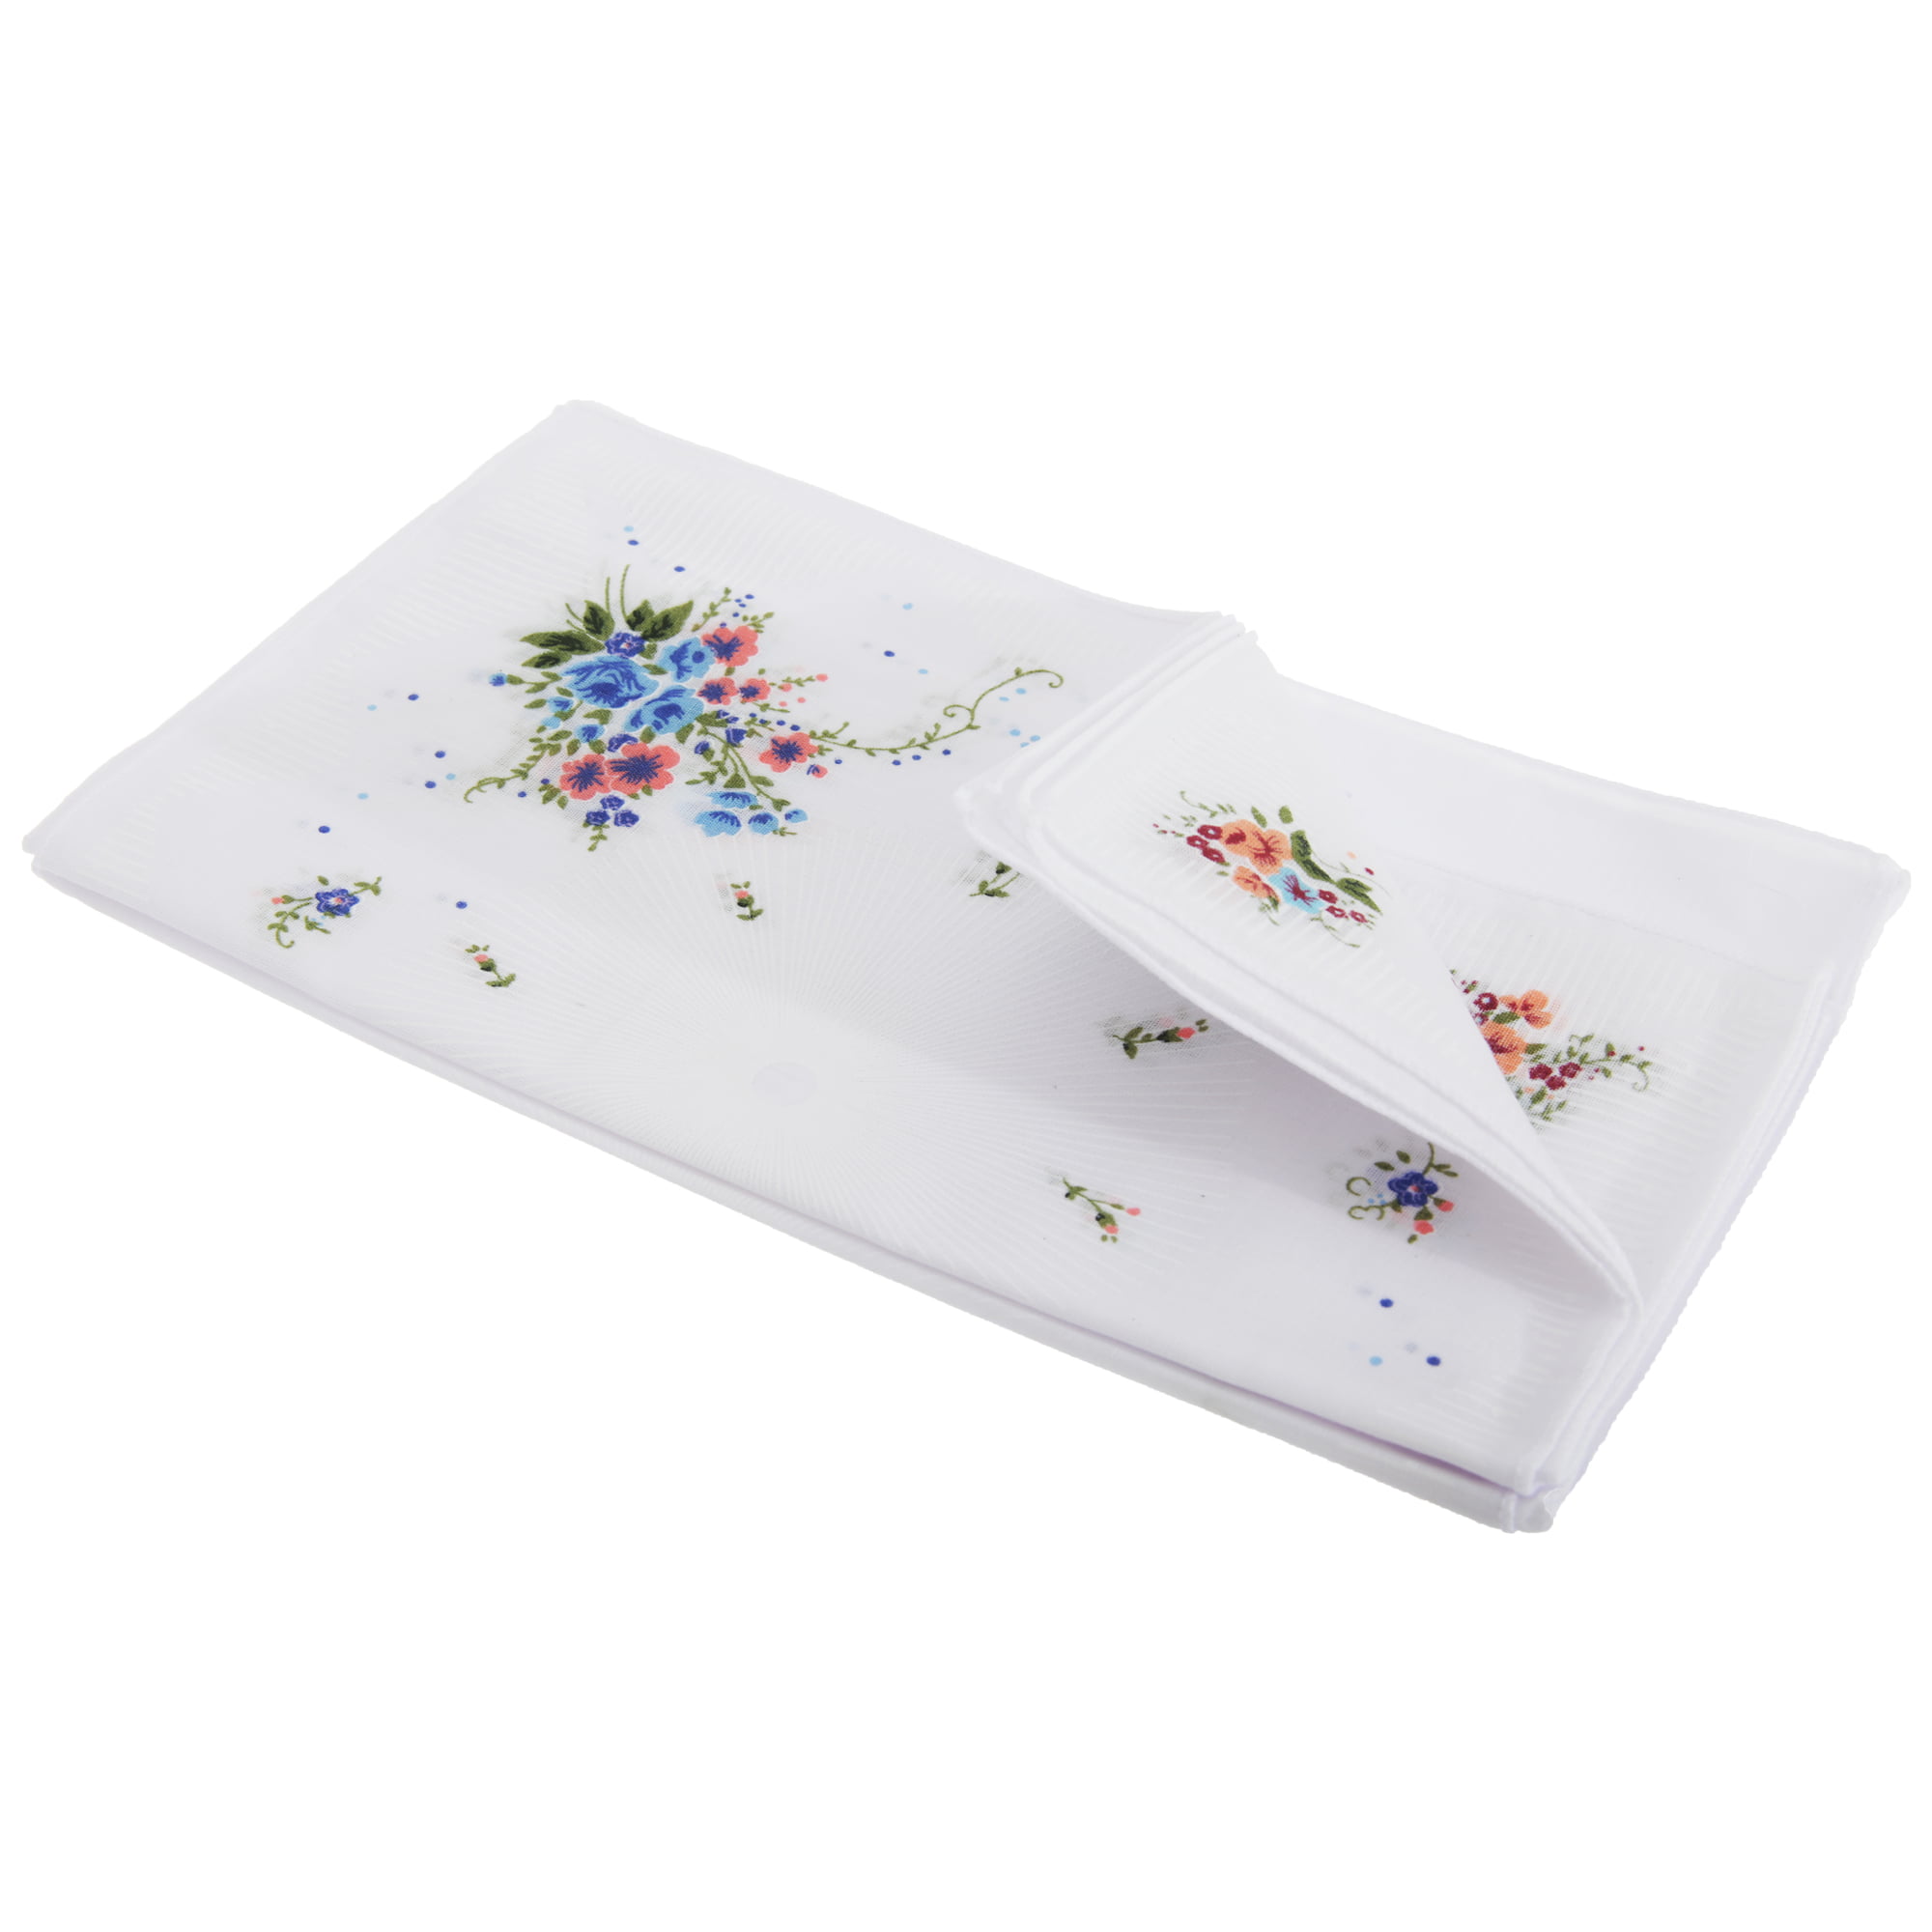 100% Cotton In Gift Box 7 Pack Women's/Ladies Dyed & Embroidered Handkerchiefs 